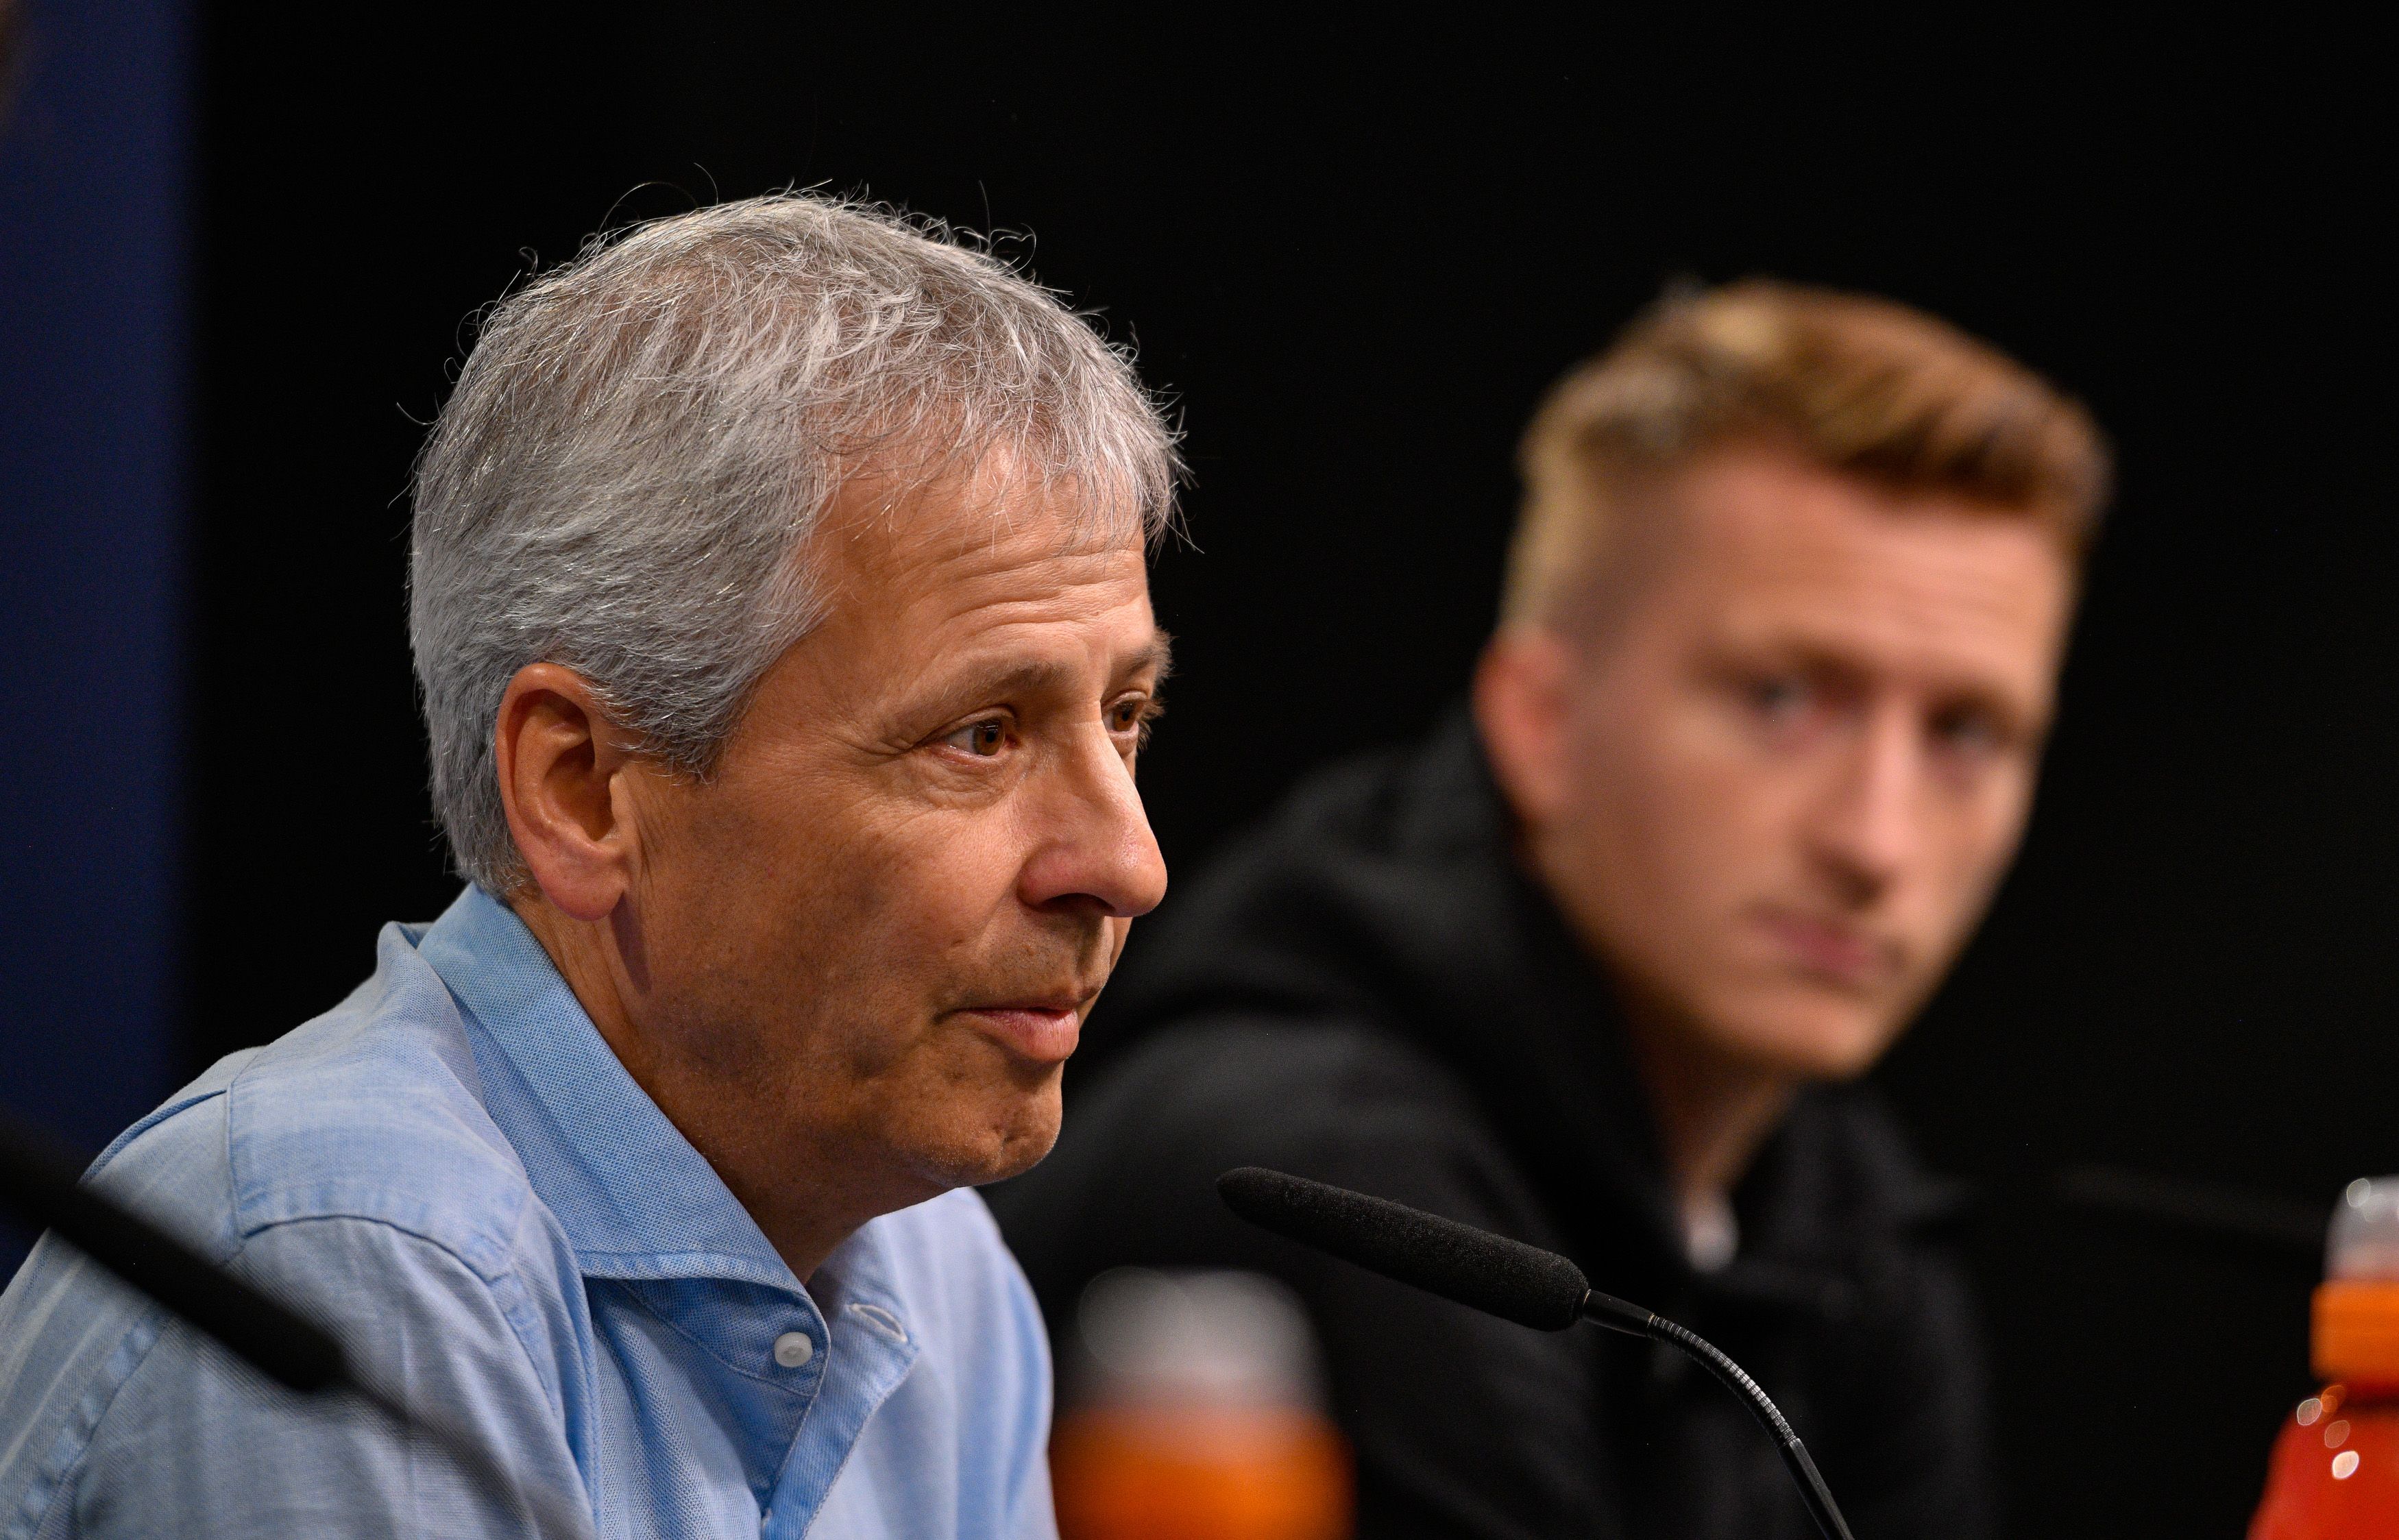 Dortmund's Swiss coach Lucien Favre and Dortmund's German forward Marco Reus are pictured during a press conference in Dortmund, western Germany, on September 16, 2019 on the eve of the UEFA Champions League Group F football match between Borussia Dortmund and Barcelona. (Photo by SASCHA SCHUERMANN / AFP)        (Photo credit should read SASCHA SCHUERMANN/AFP/Getty Images)